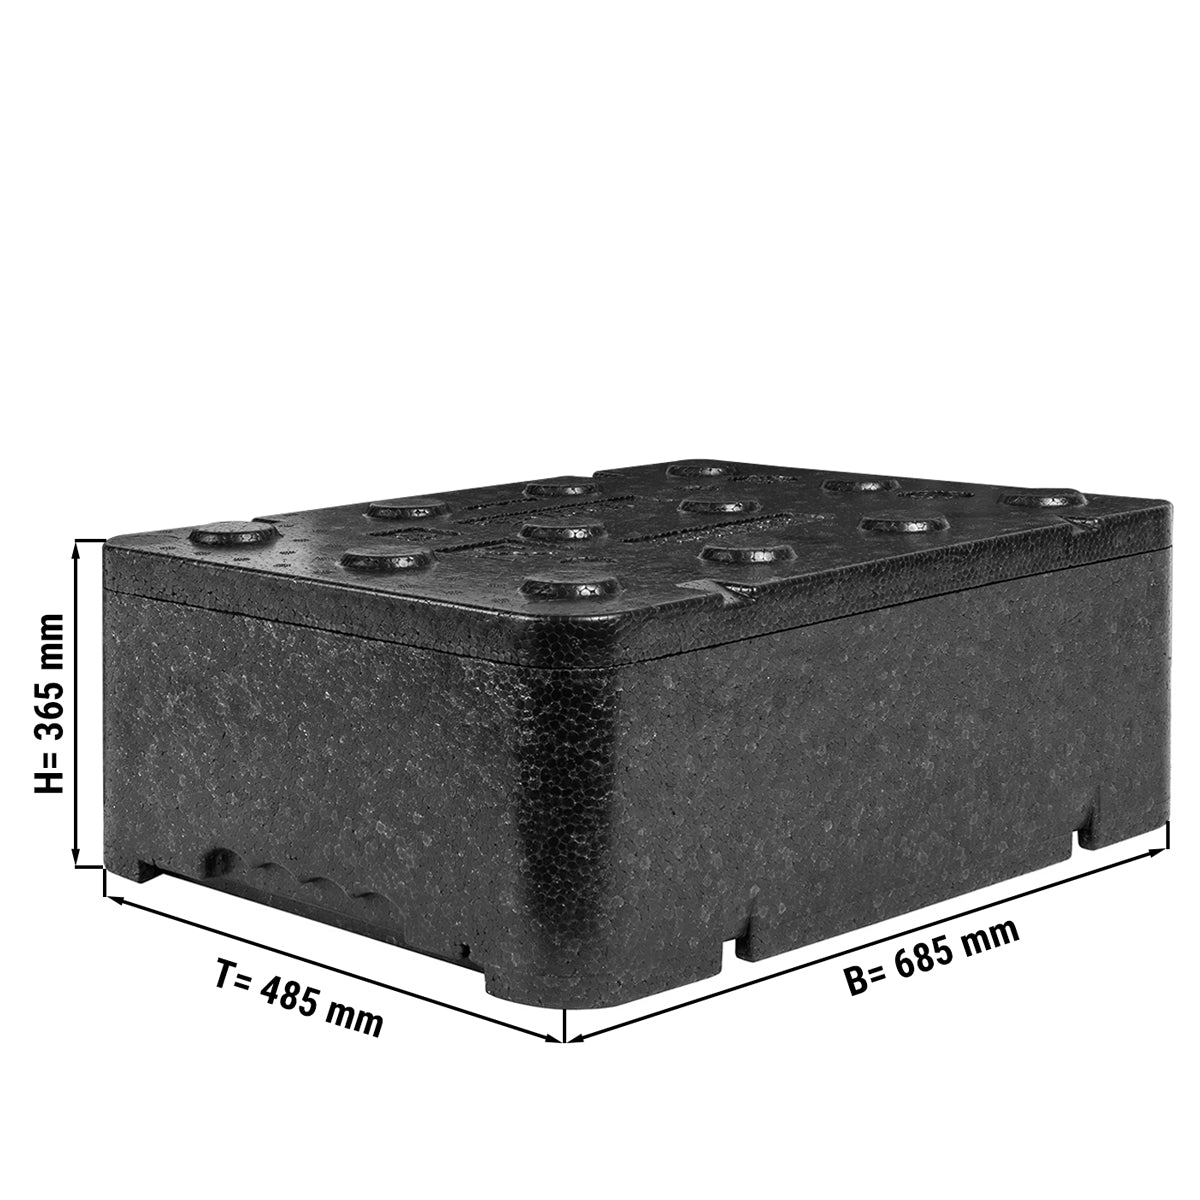 Thermobox / Polibox - for EN-ark - 685 x 485 x 365 mm